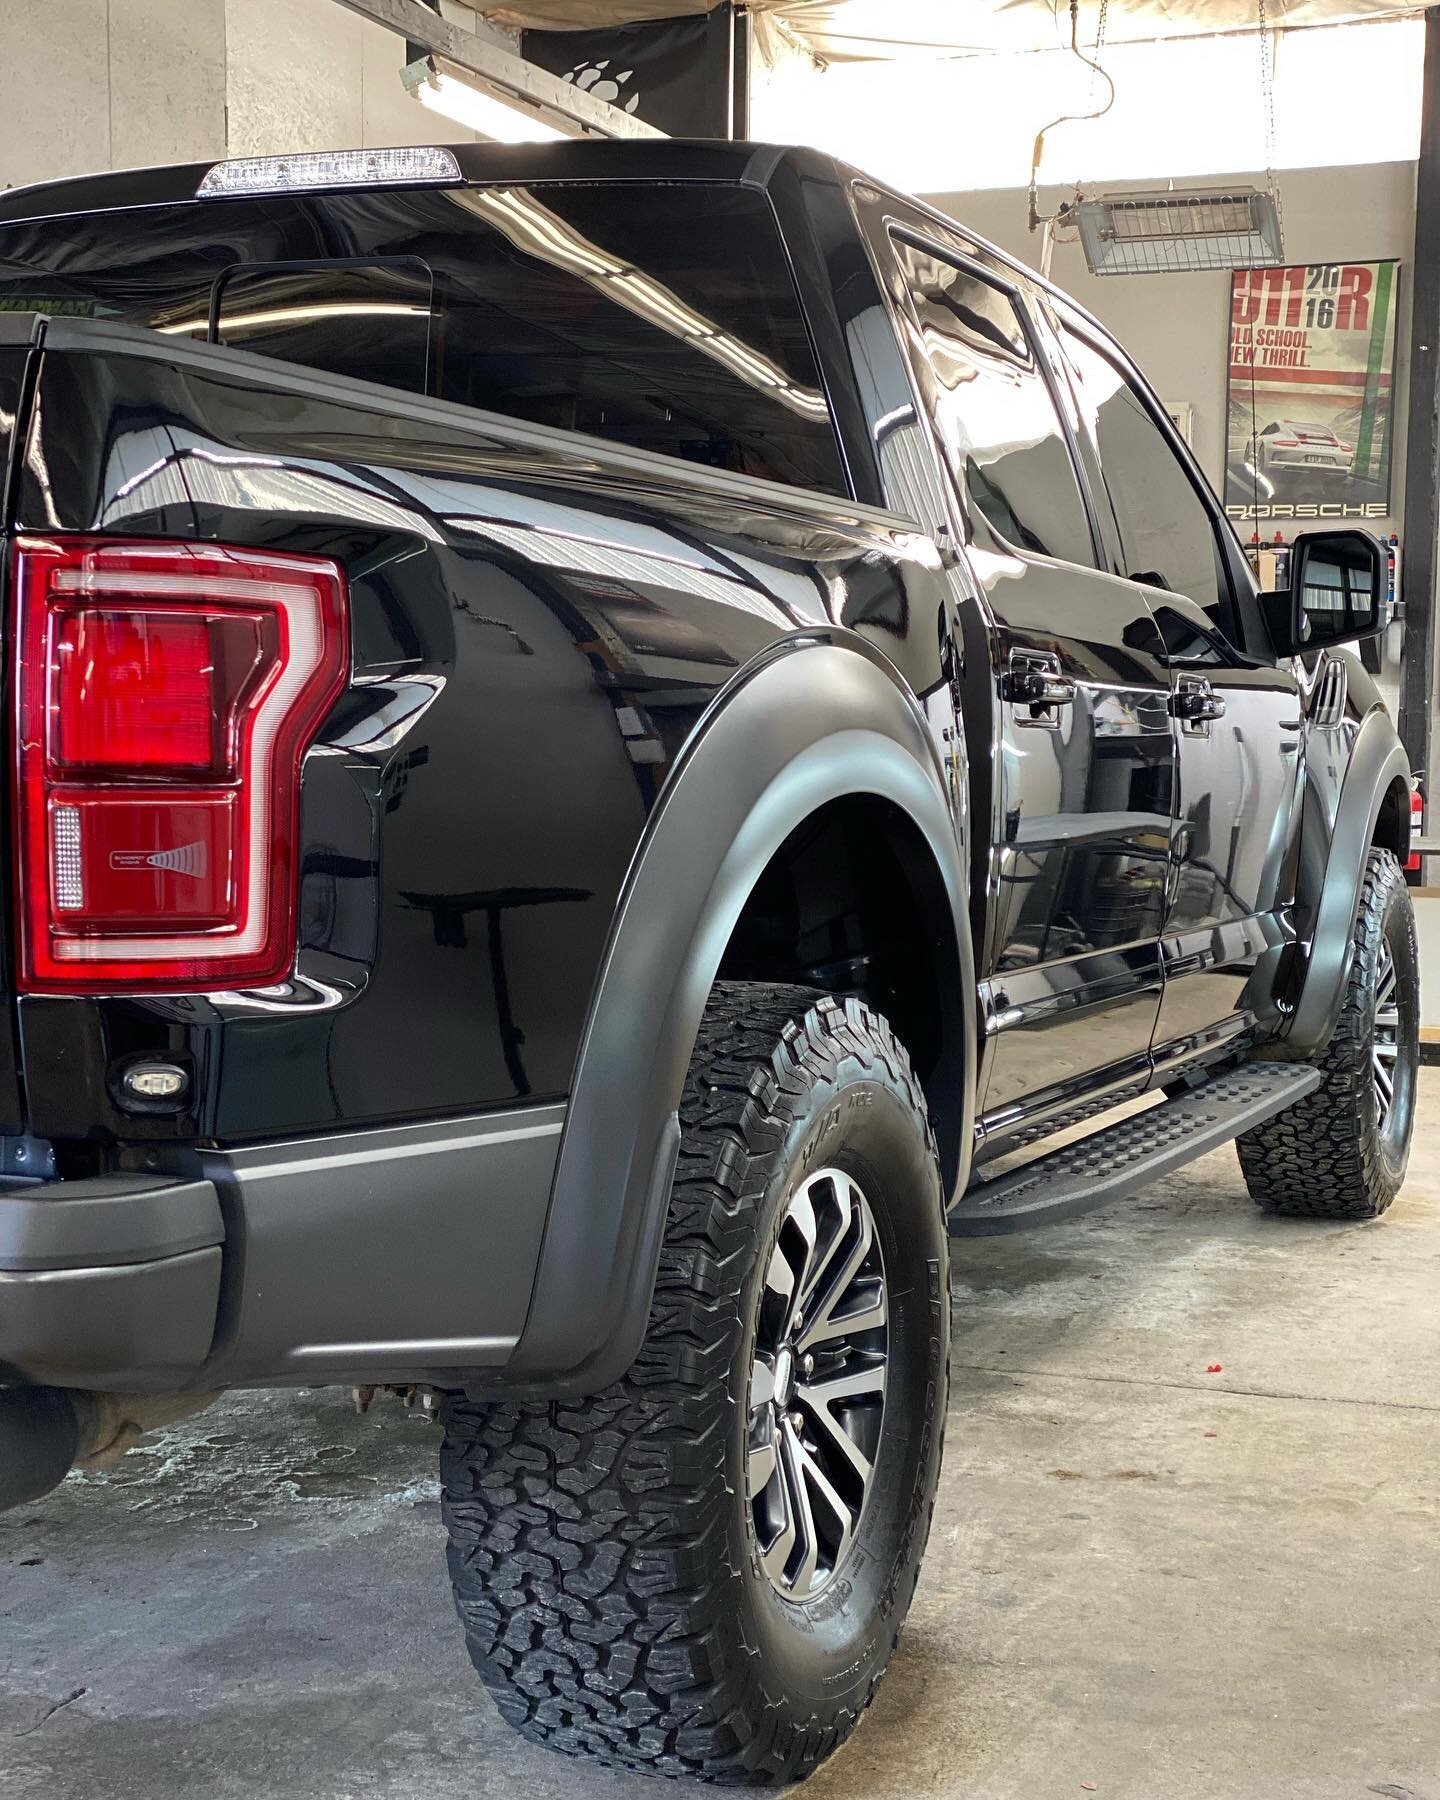 Ford Raptor came by for a level 1 polishing/prep + a coating of @iglcoatings 3-year Quartz+ Graphene-Infused paint coating. The wheels were also sprayed in ECLIPSE Industrial coating. She&rsquo;s now protected with ease of cleaning for years to come,